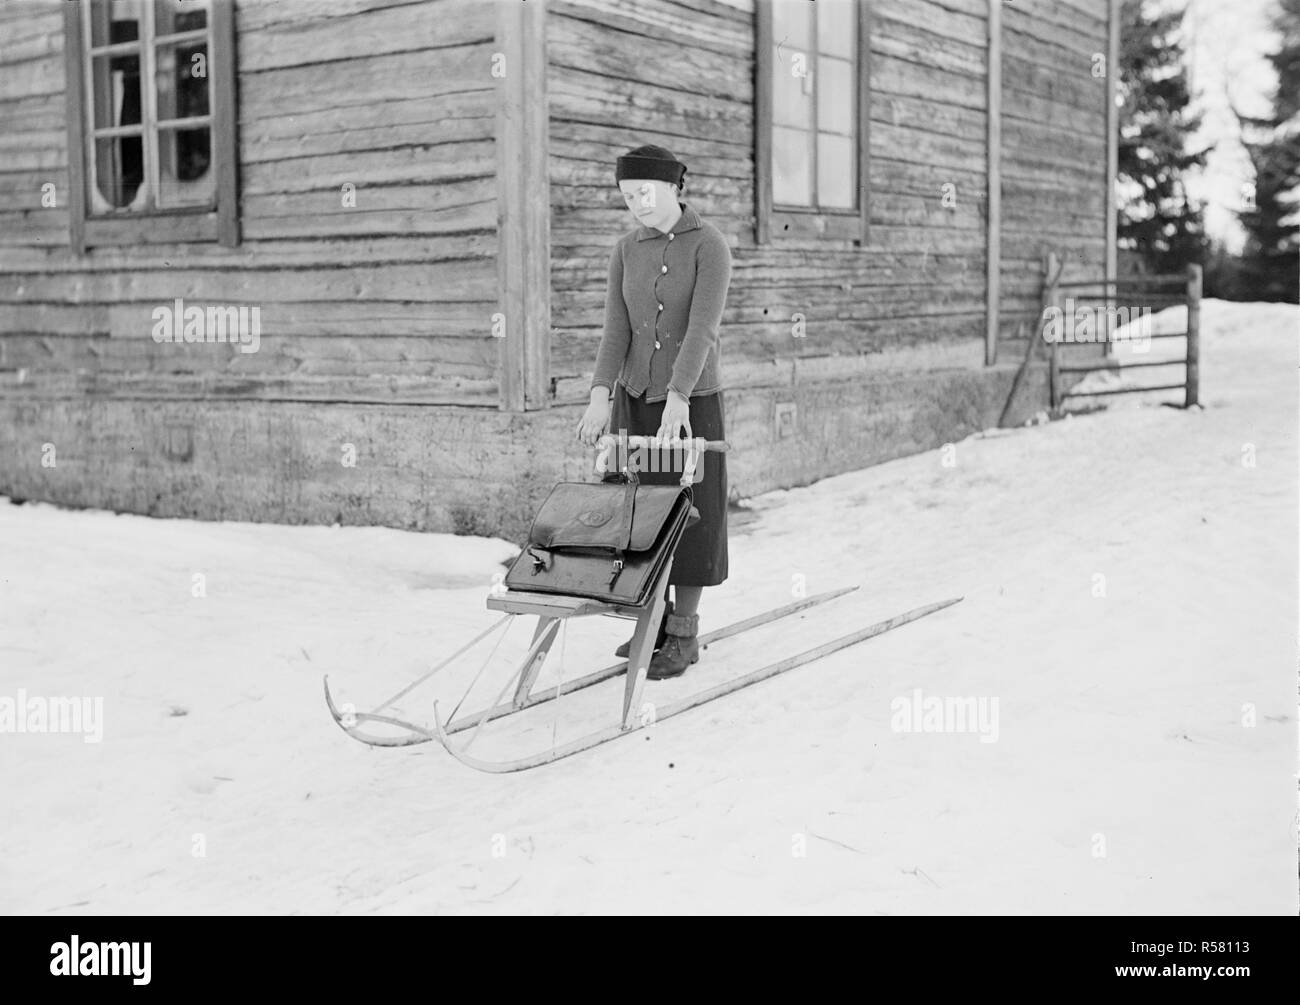 Finland History - A mail carrier on a kicksled. Somero, Varsinais-Suomi, Finland ca. 1930s Stock Photo